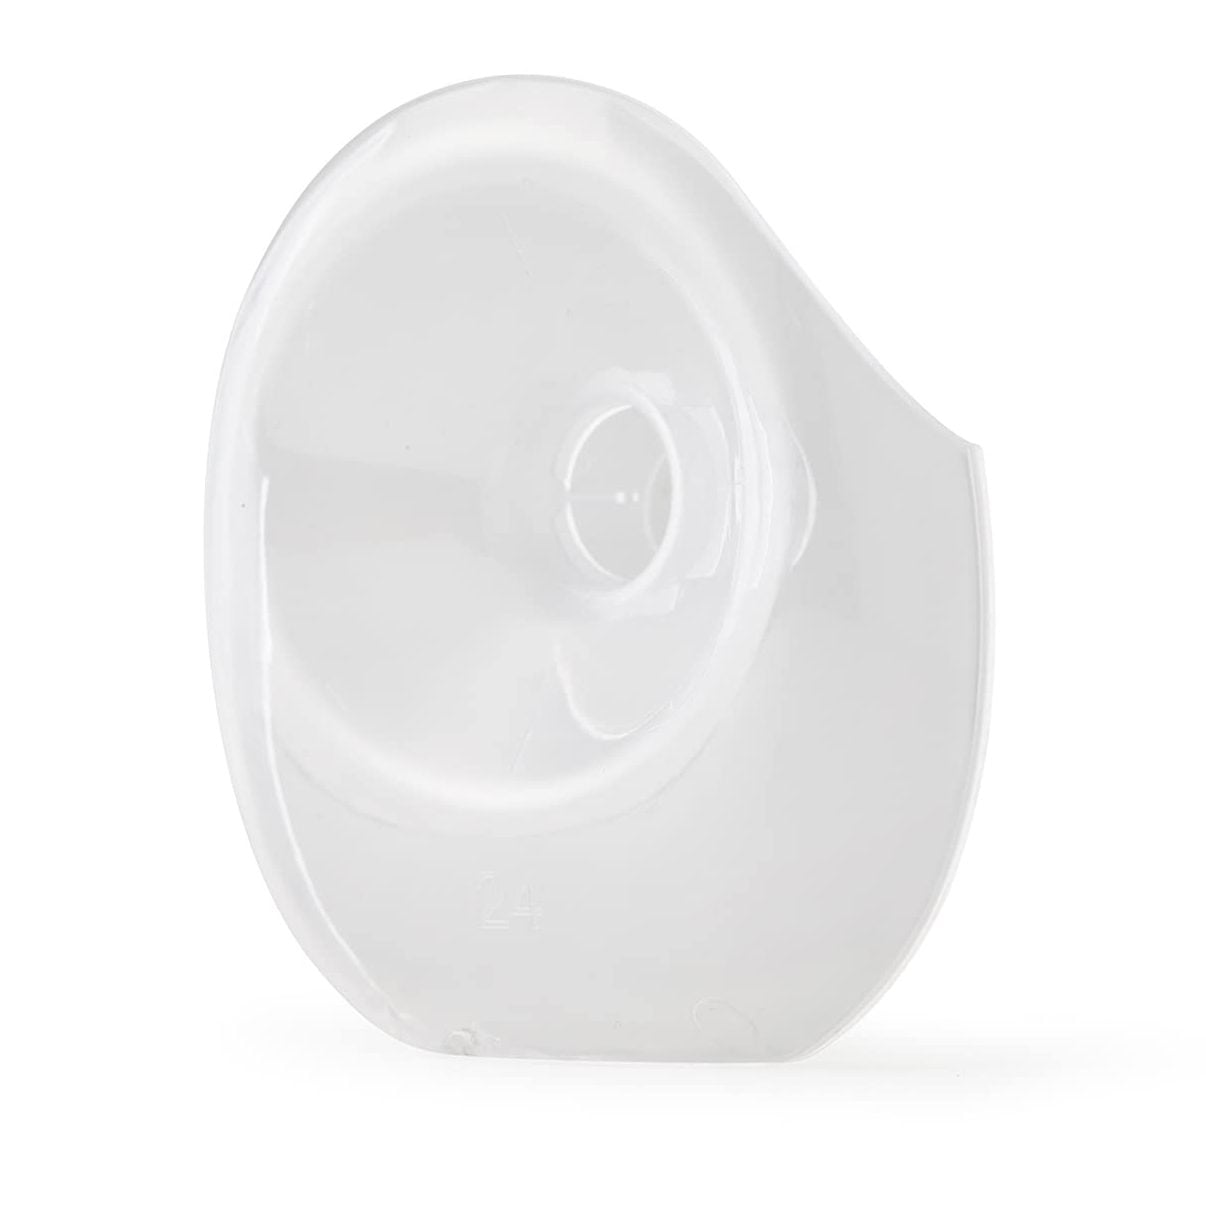 Willow pump: Hands-free wearable breast pump.